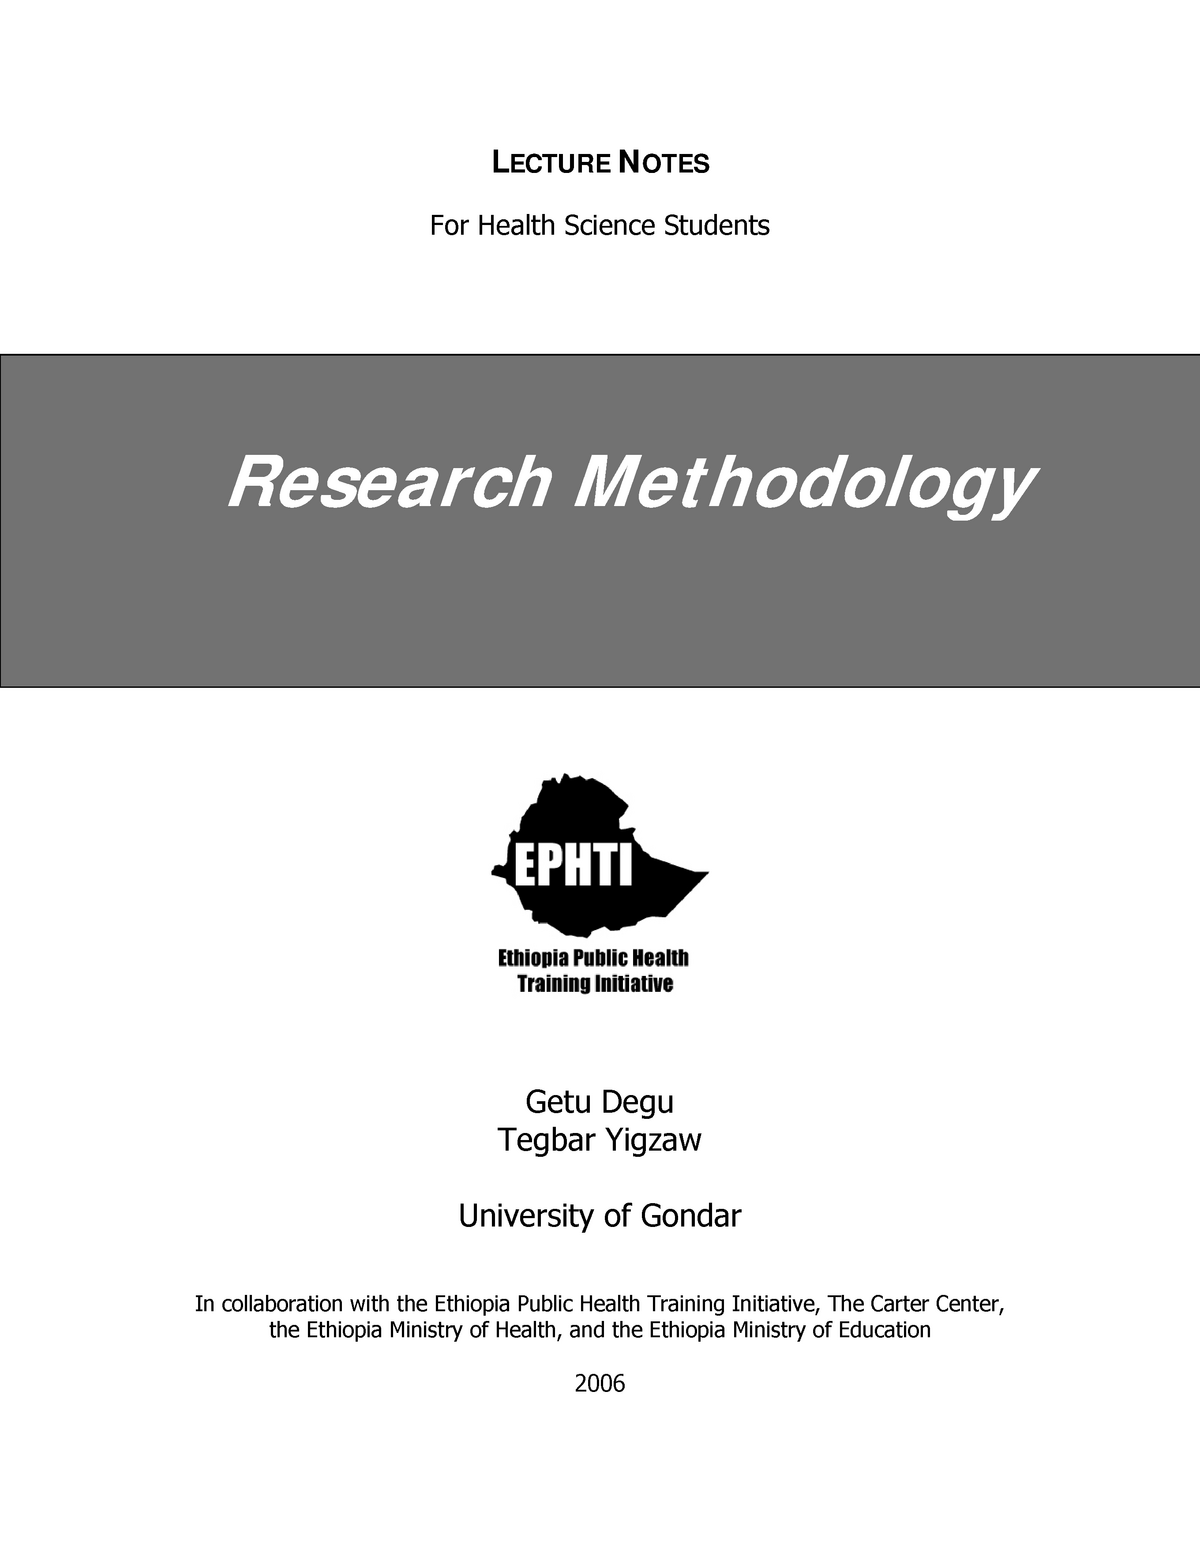 research methodology phd course work notes pdf